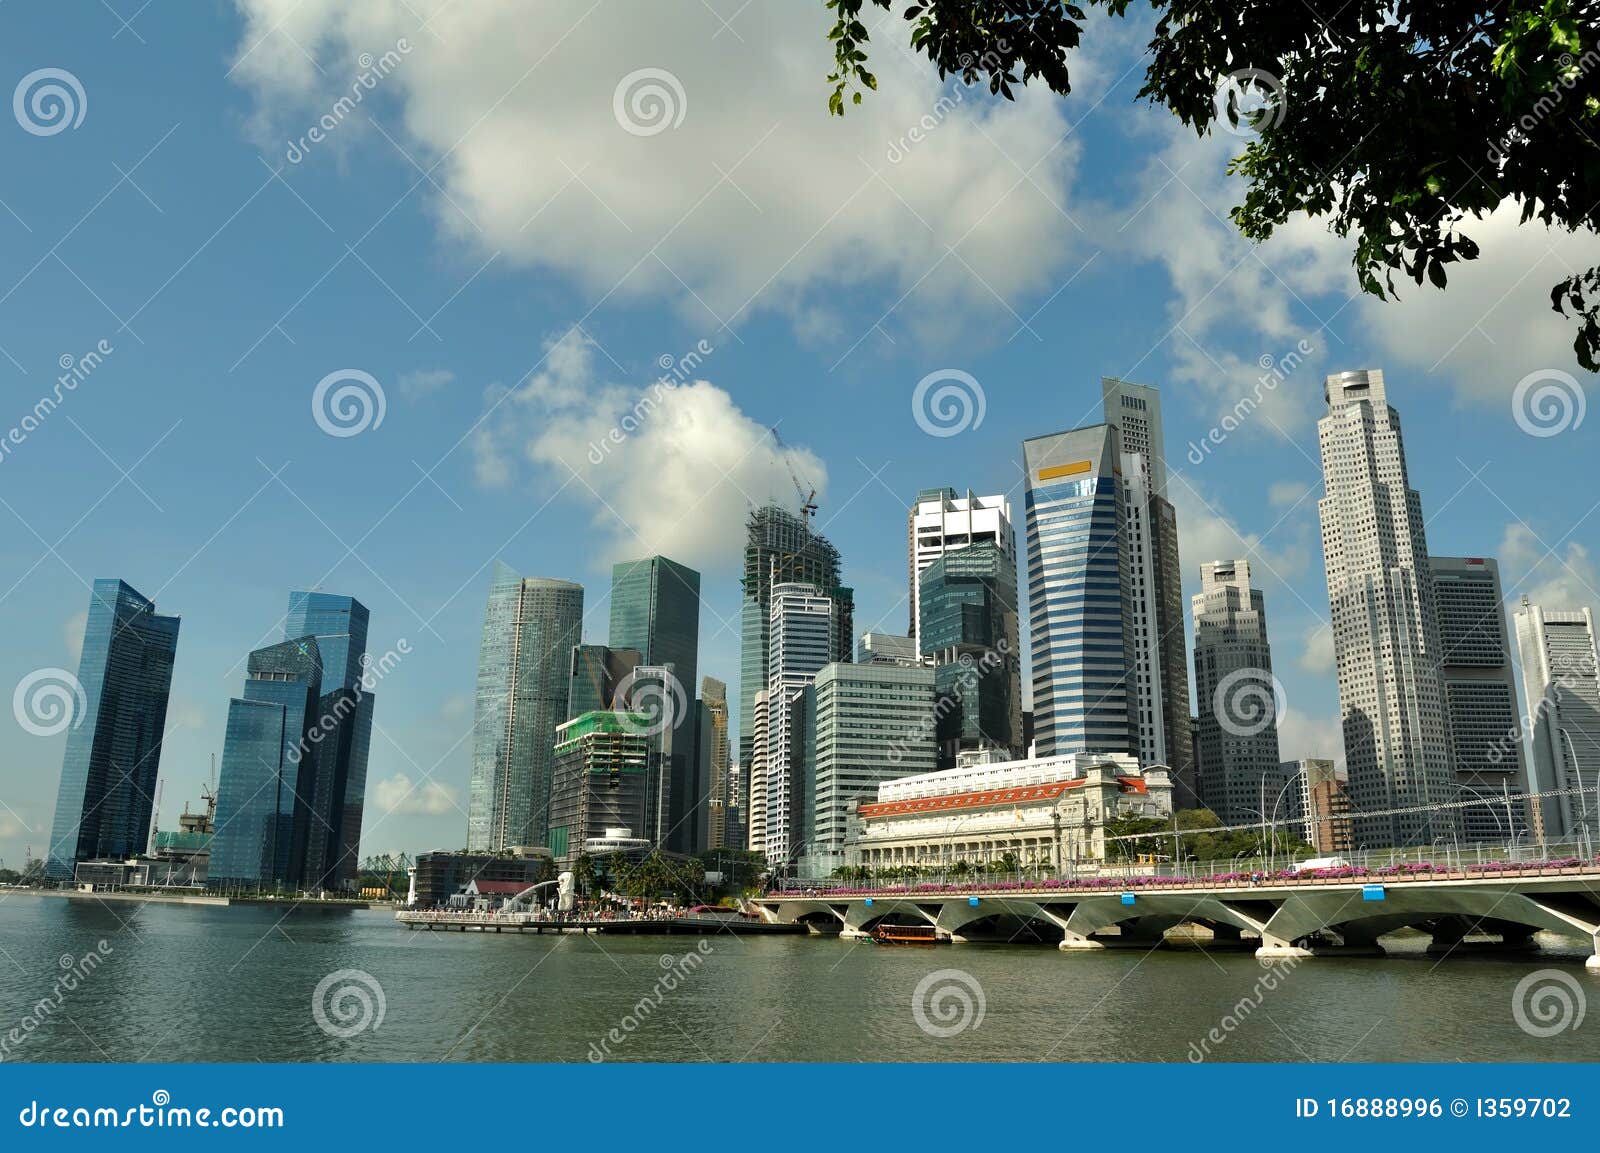 Singapore Skyline At Day Time Stock Photo - Image of 